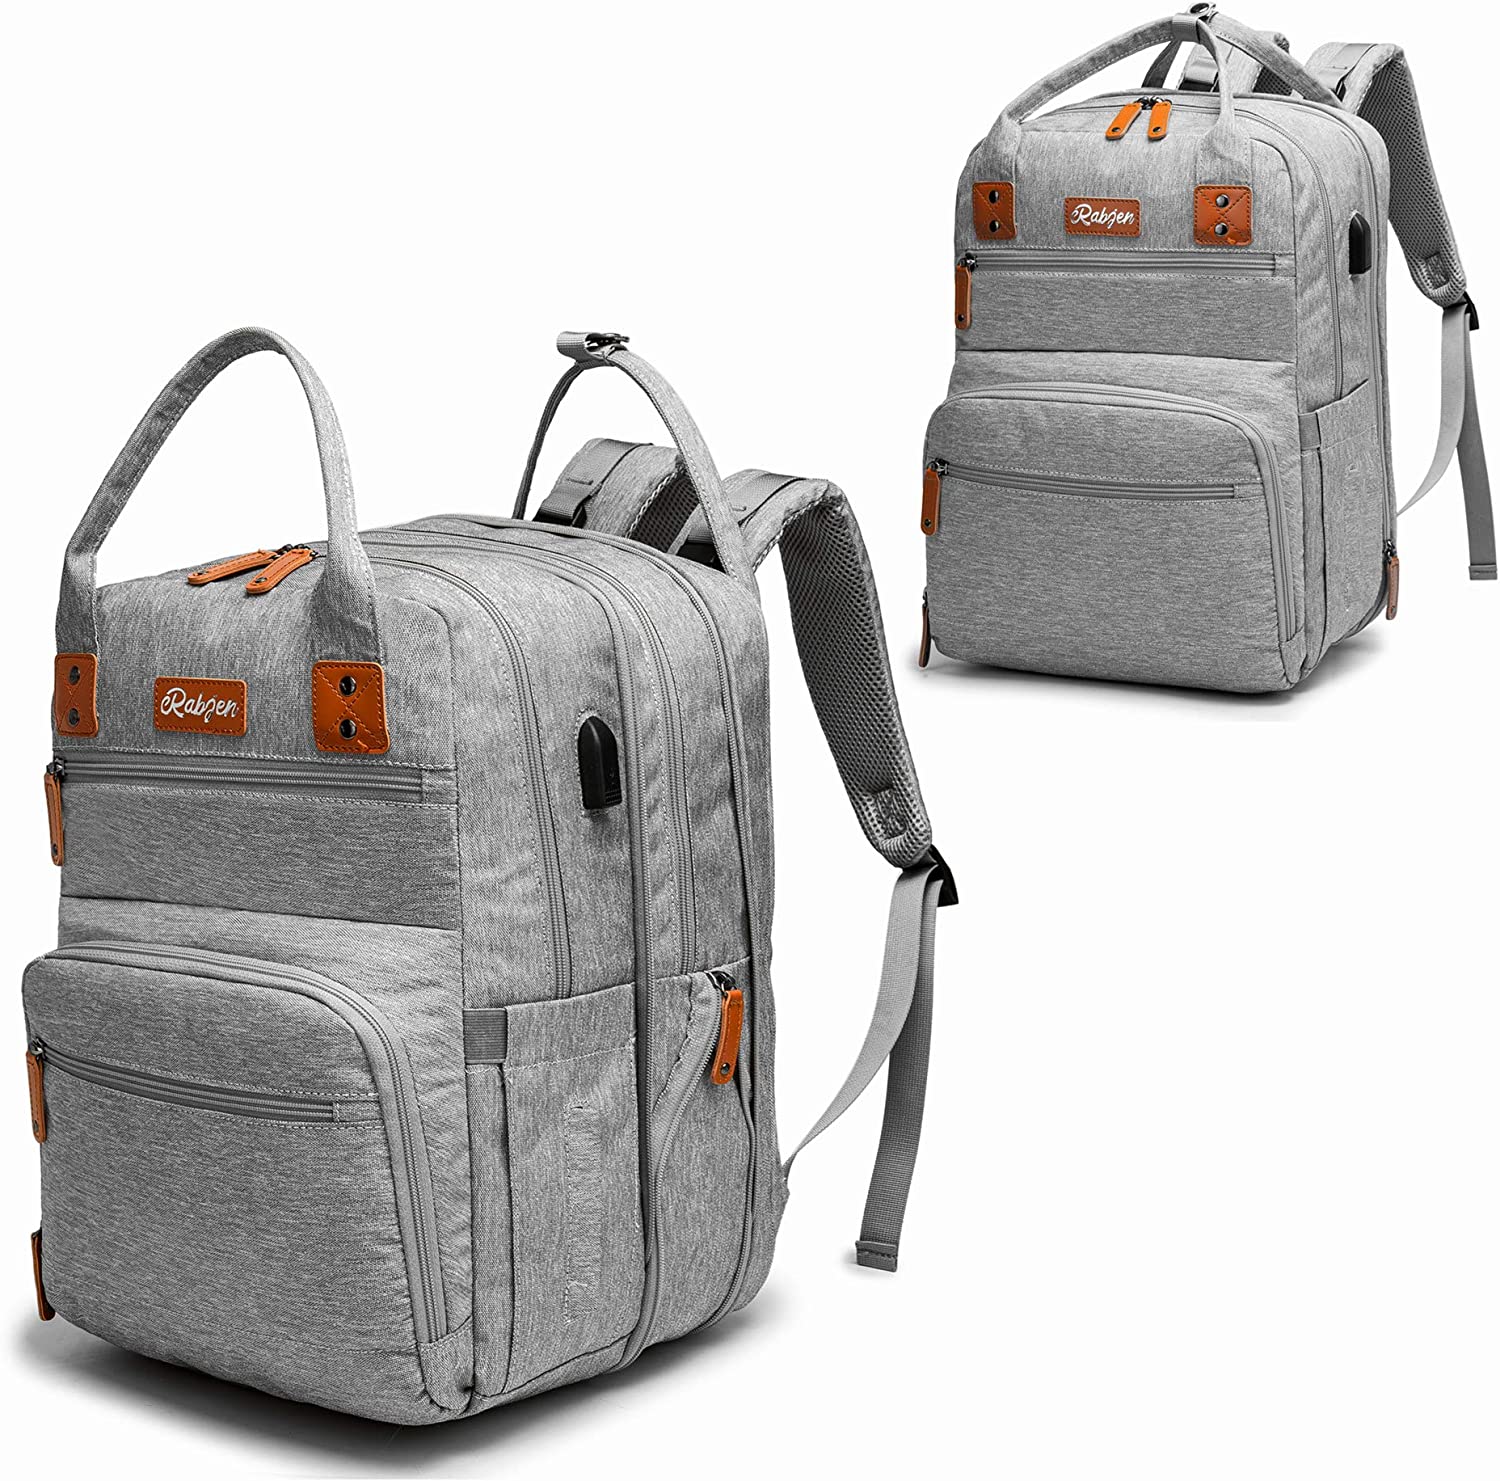 twin-mom-gifts-backpack